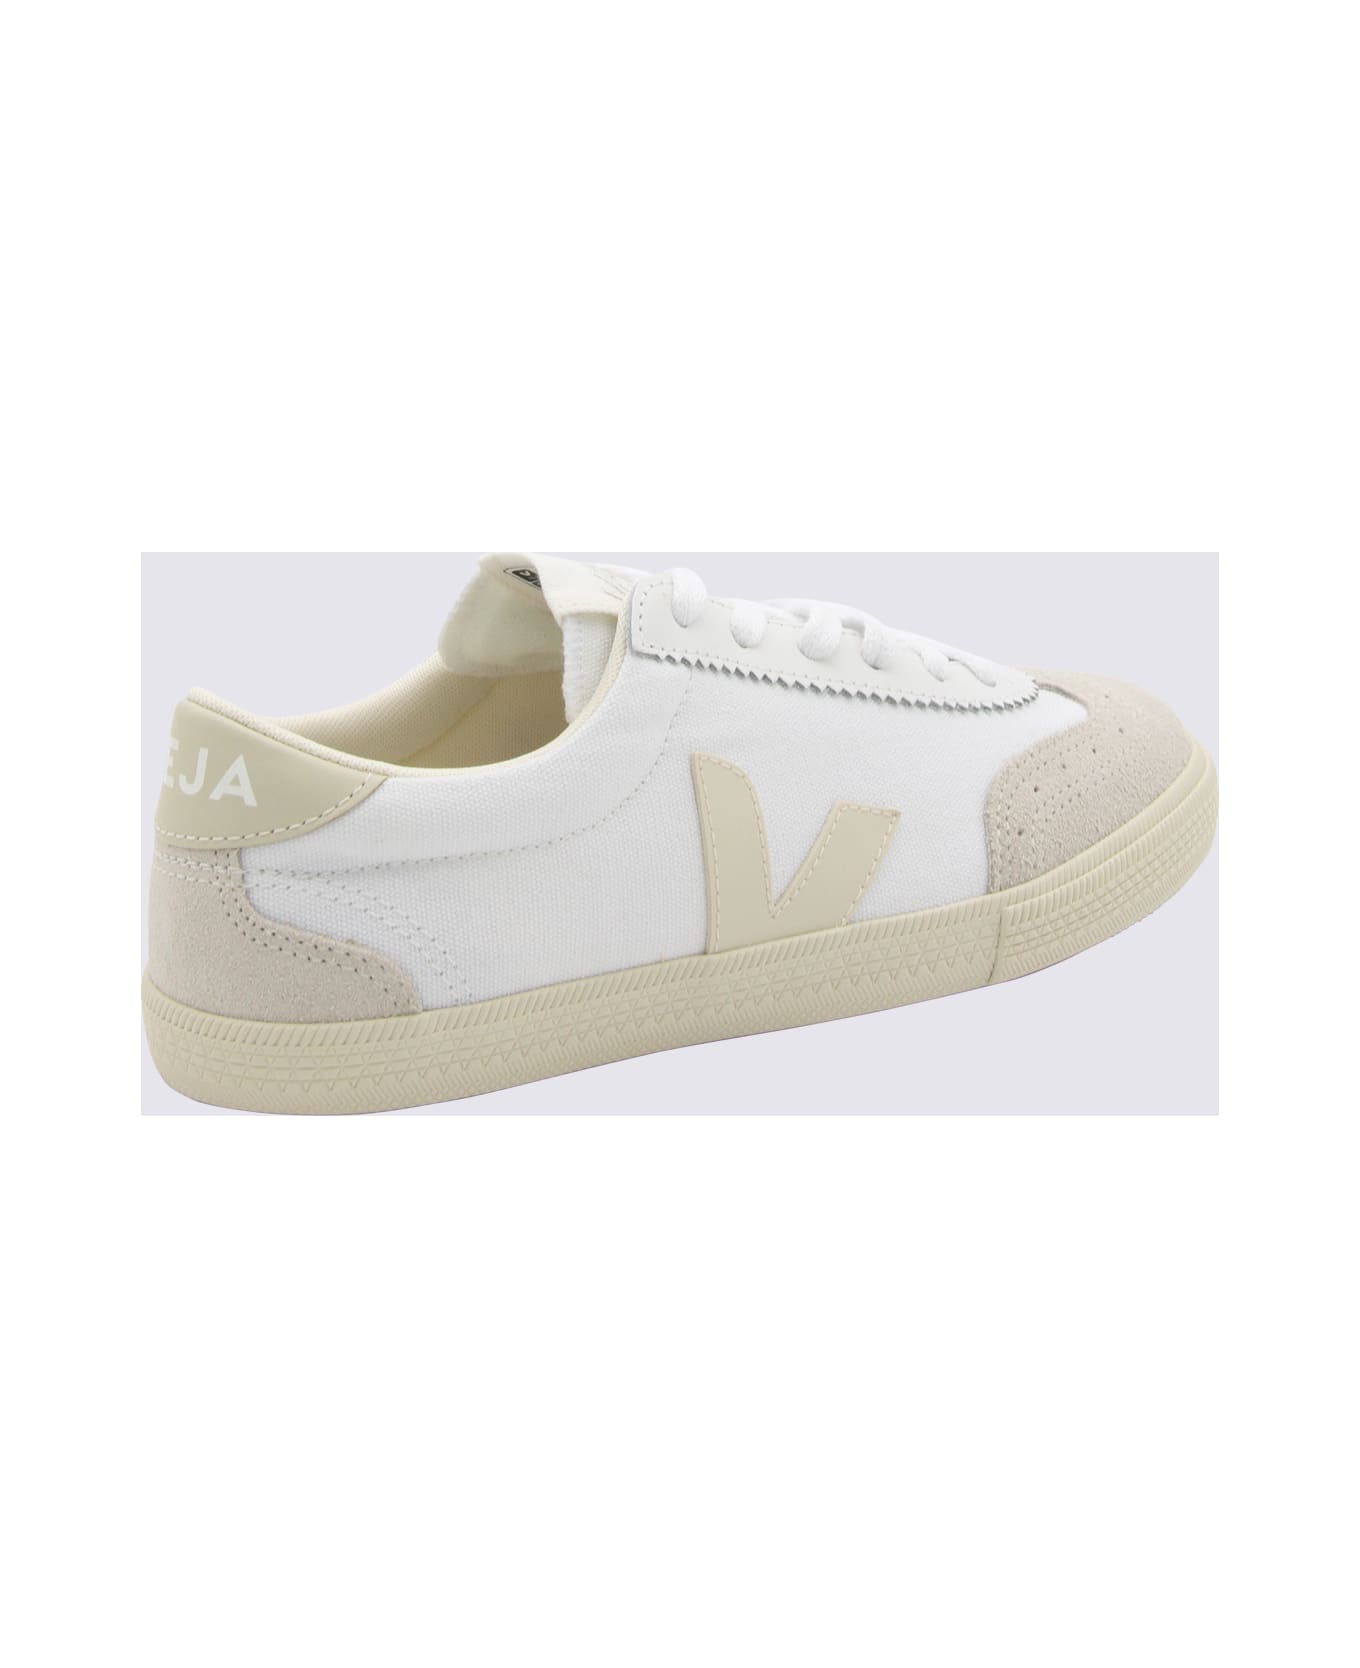 Veja White Leather Sneakers - WHITE_PIERRE スニーカー